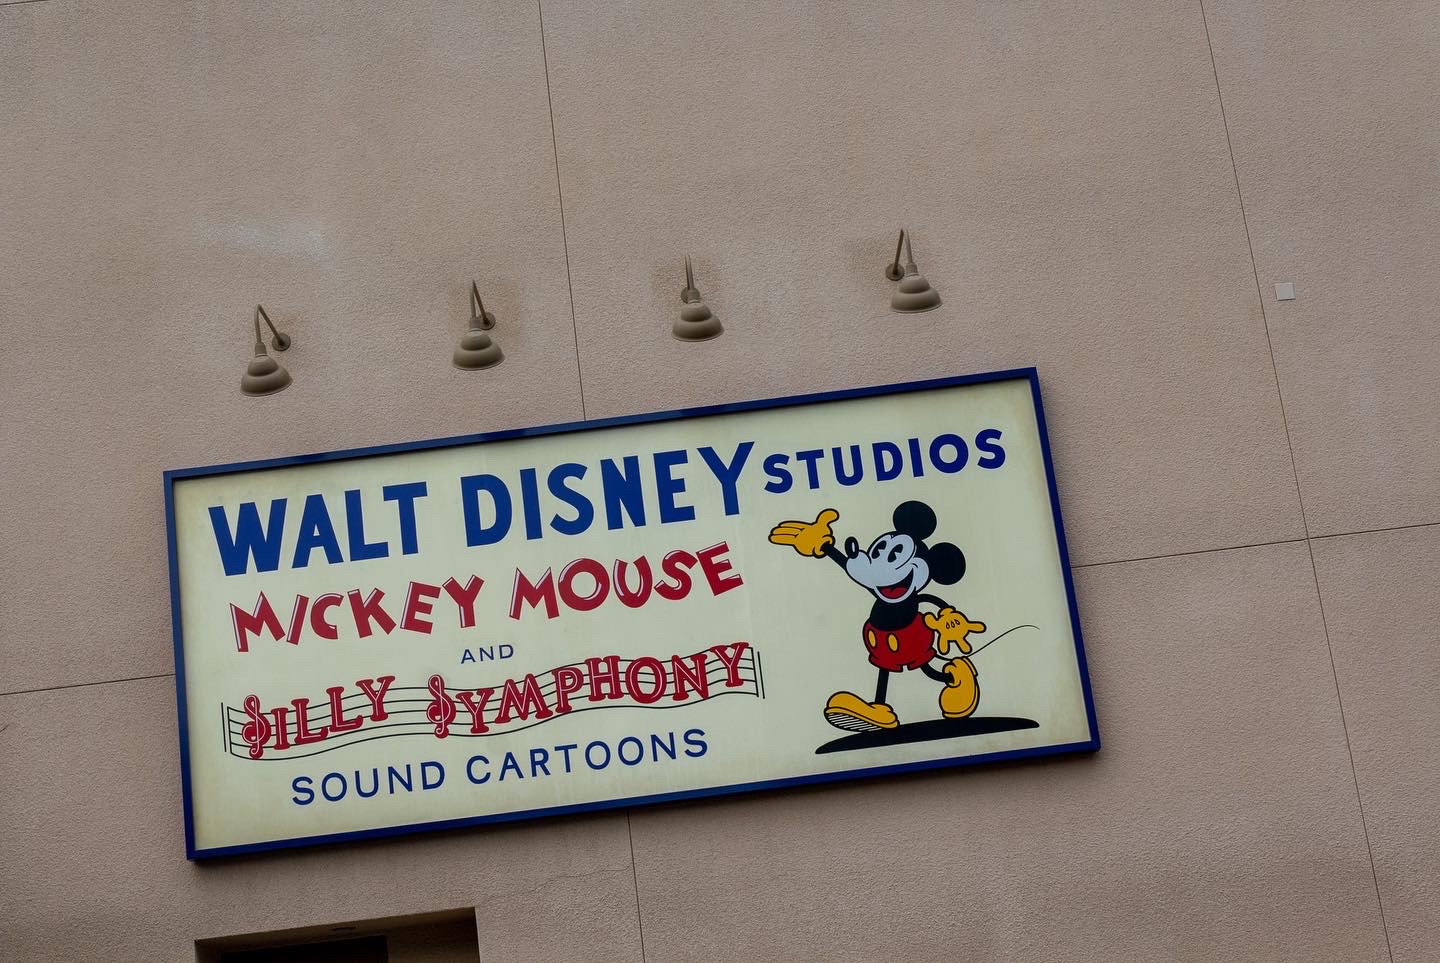 Sign on the side of a beige building that reads Walt Disney Studios Mickey Mouse and Silly Symphony Sound Cartoons with an illustration of Mickey Mouse